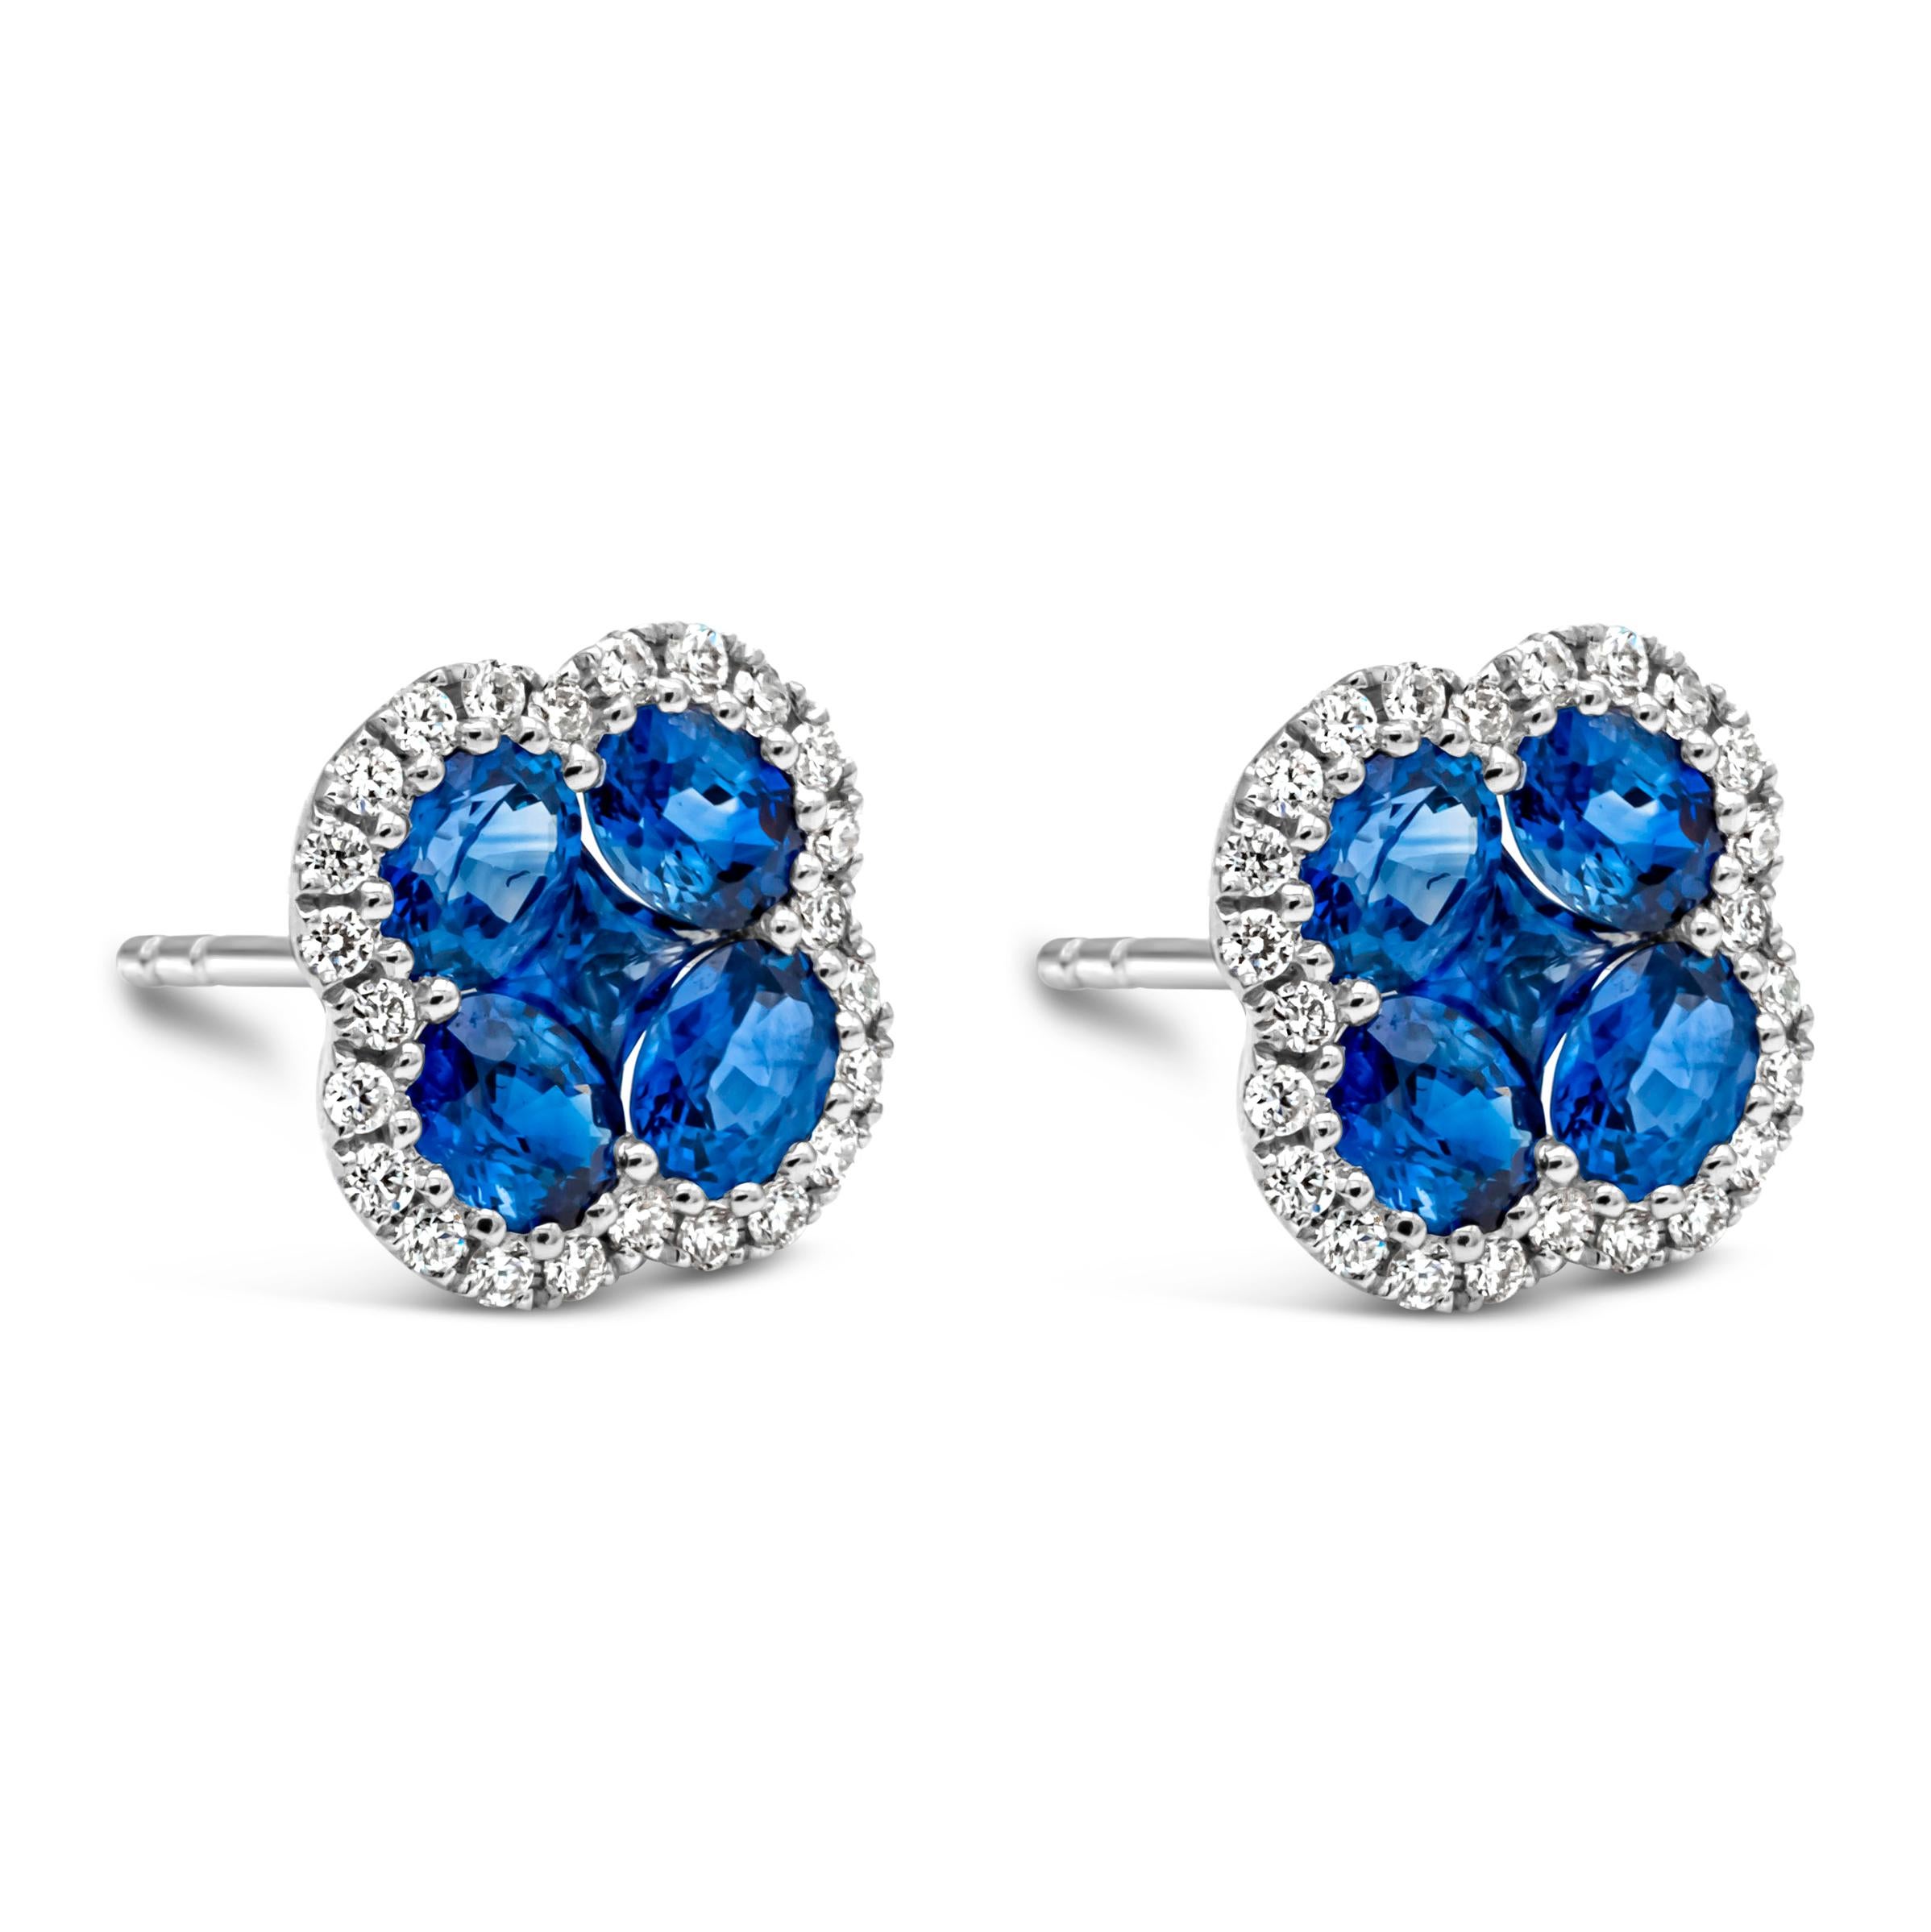 Contemporary 1.94 Carats Total Mixed Shape Blue Sapphire & Round Diamond Halo Stud Earrings For Sale